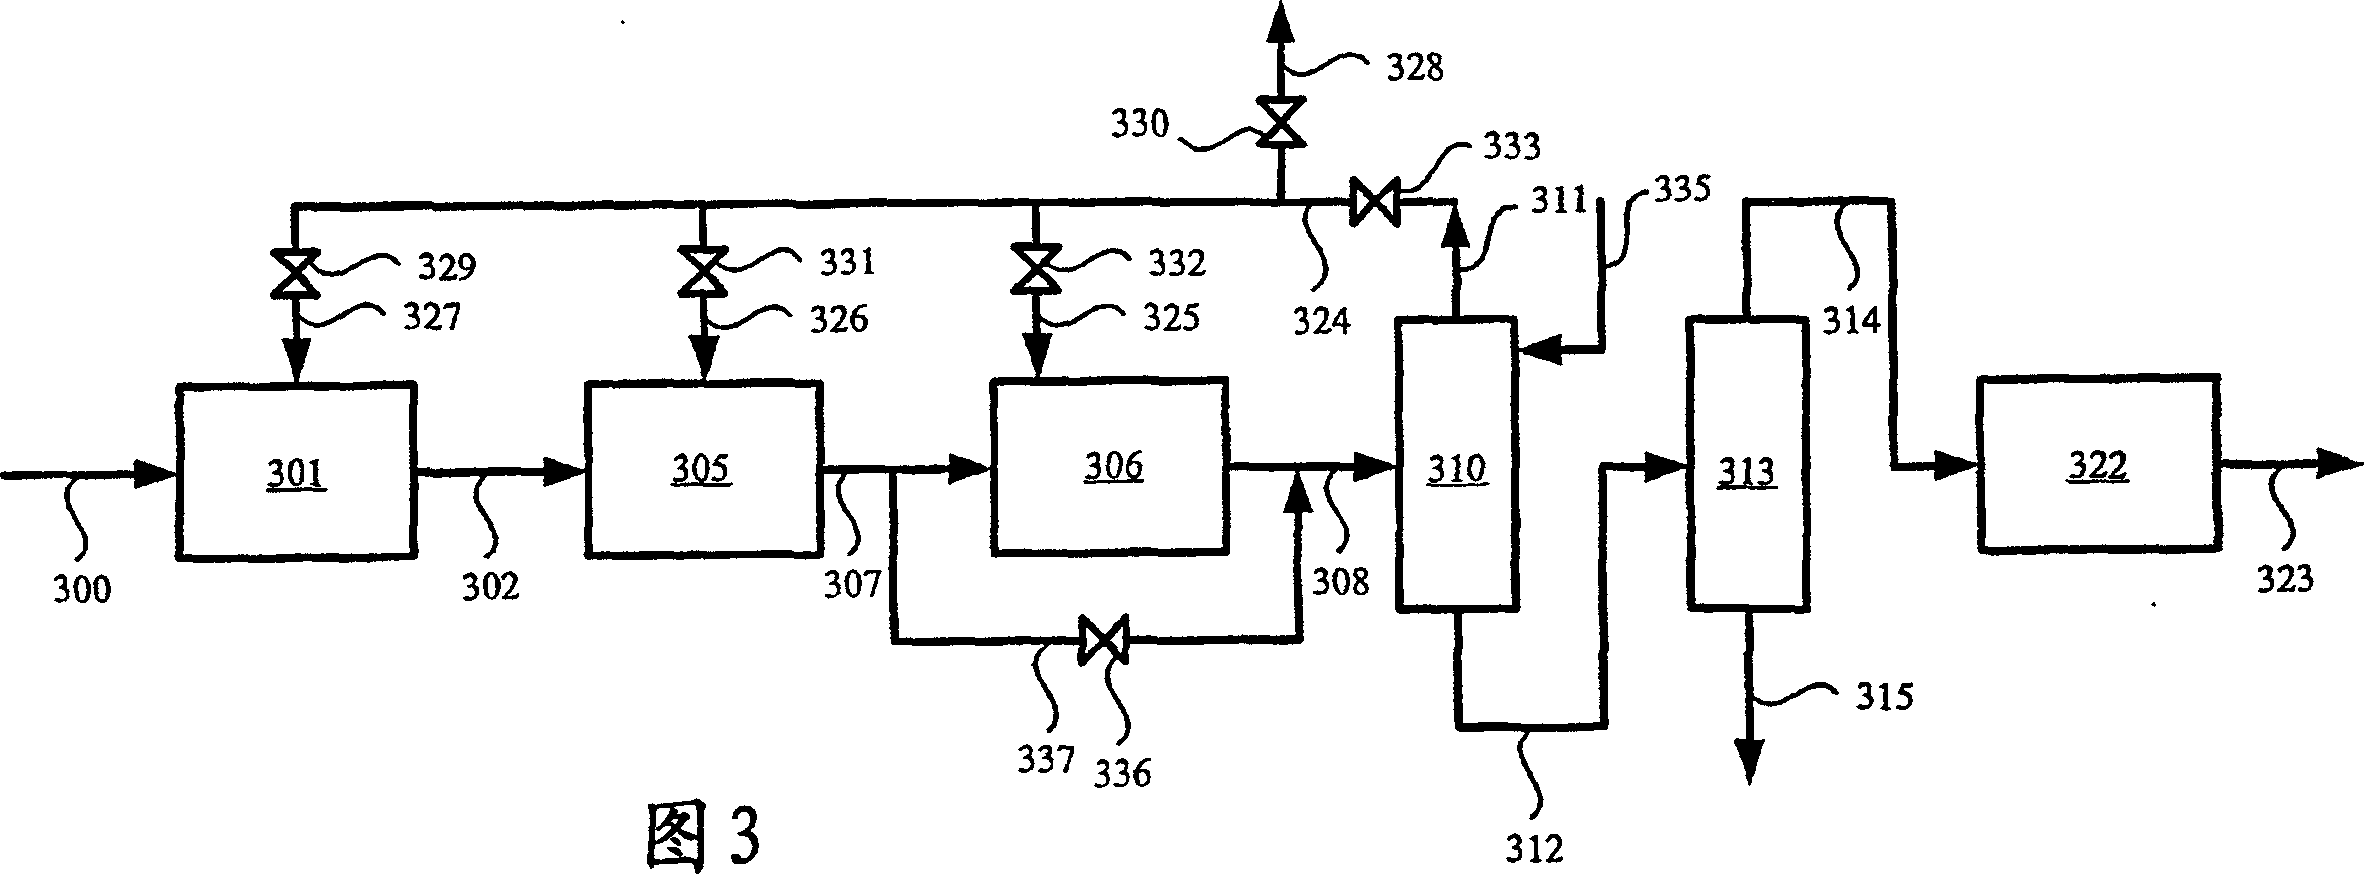 Method for controlling the ratio of ethylene to propylene produced in an oxygenate to olefin conversion process